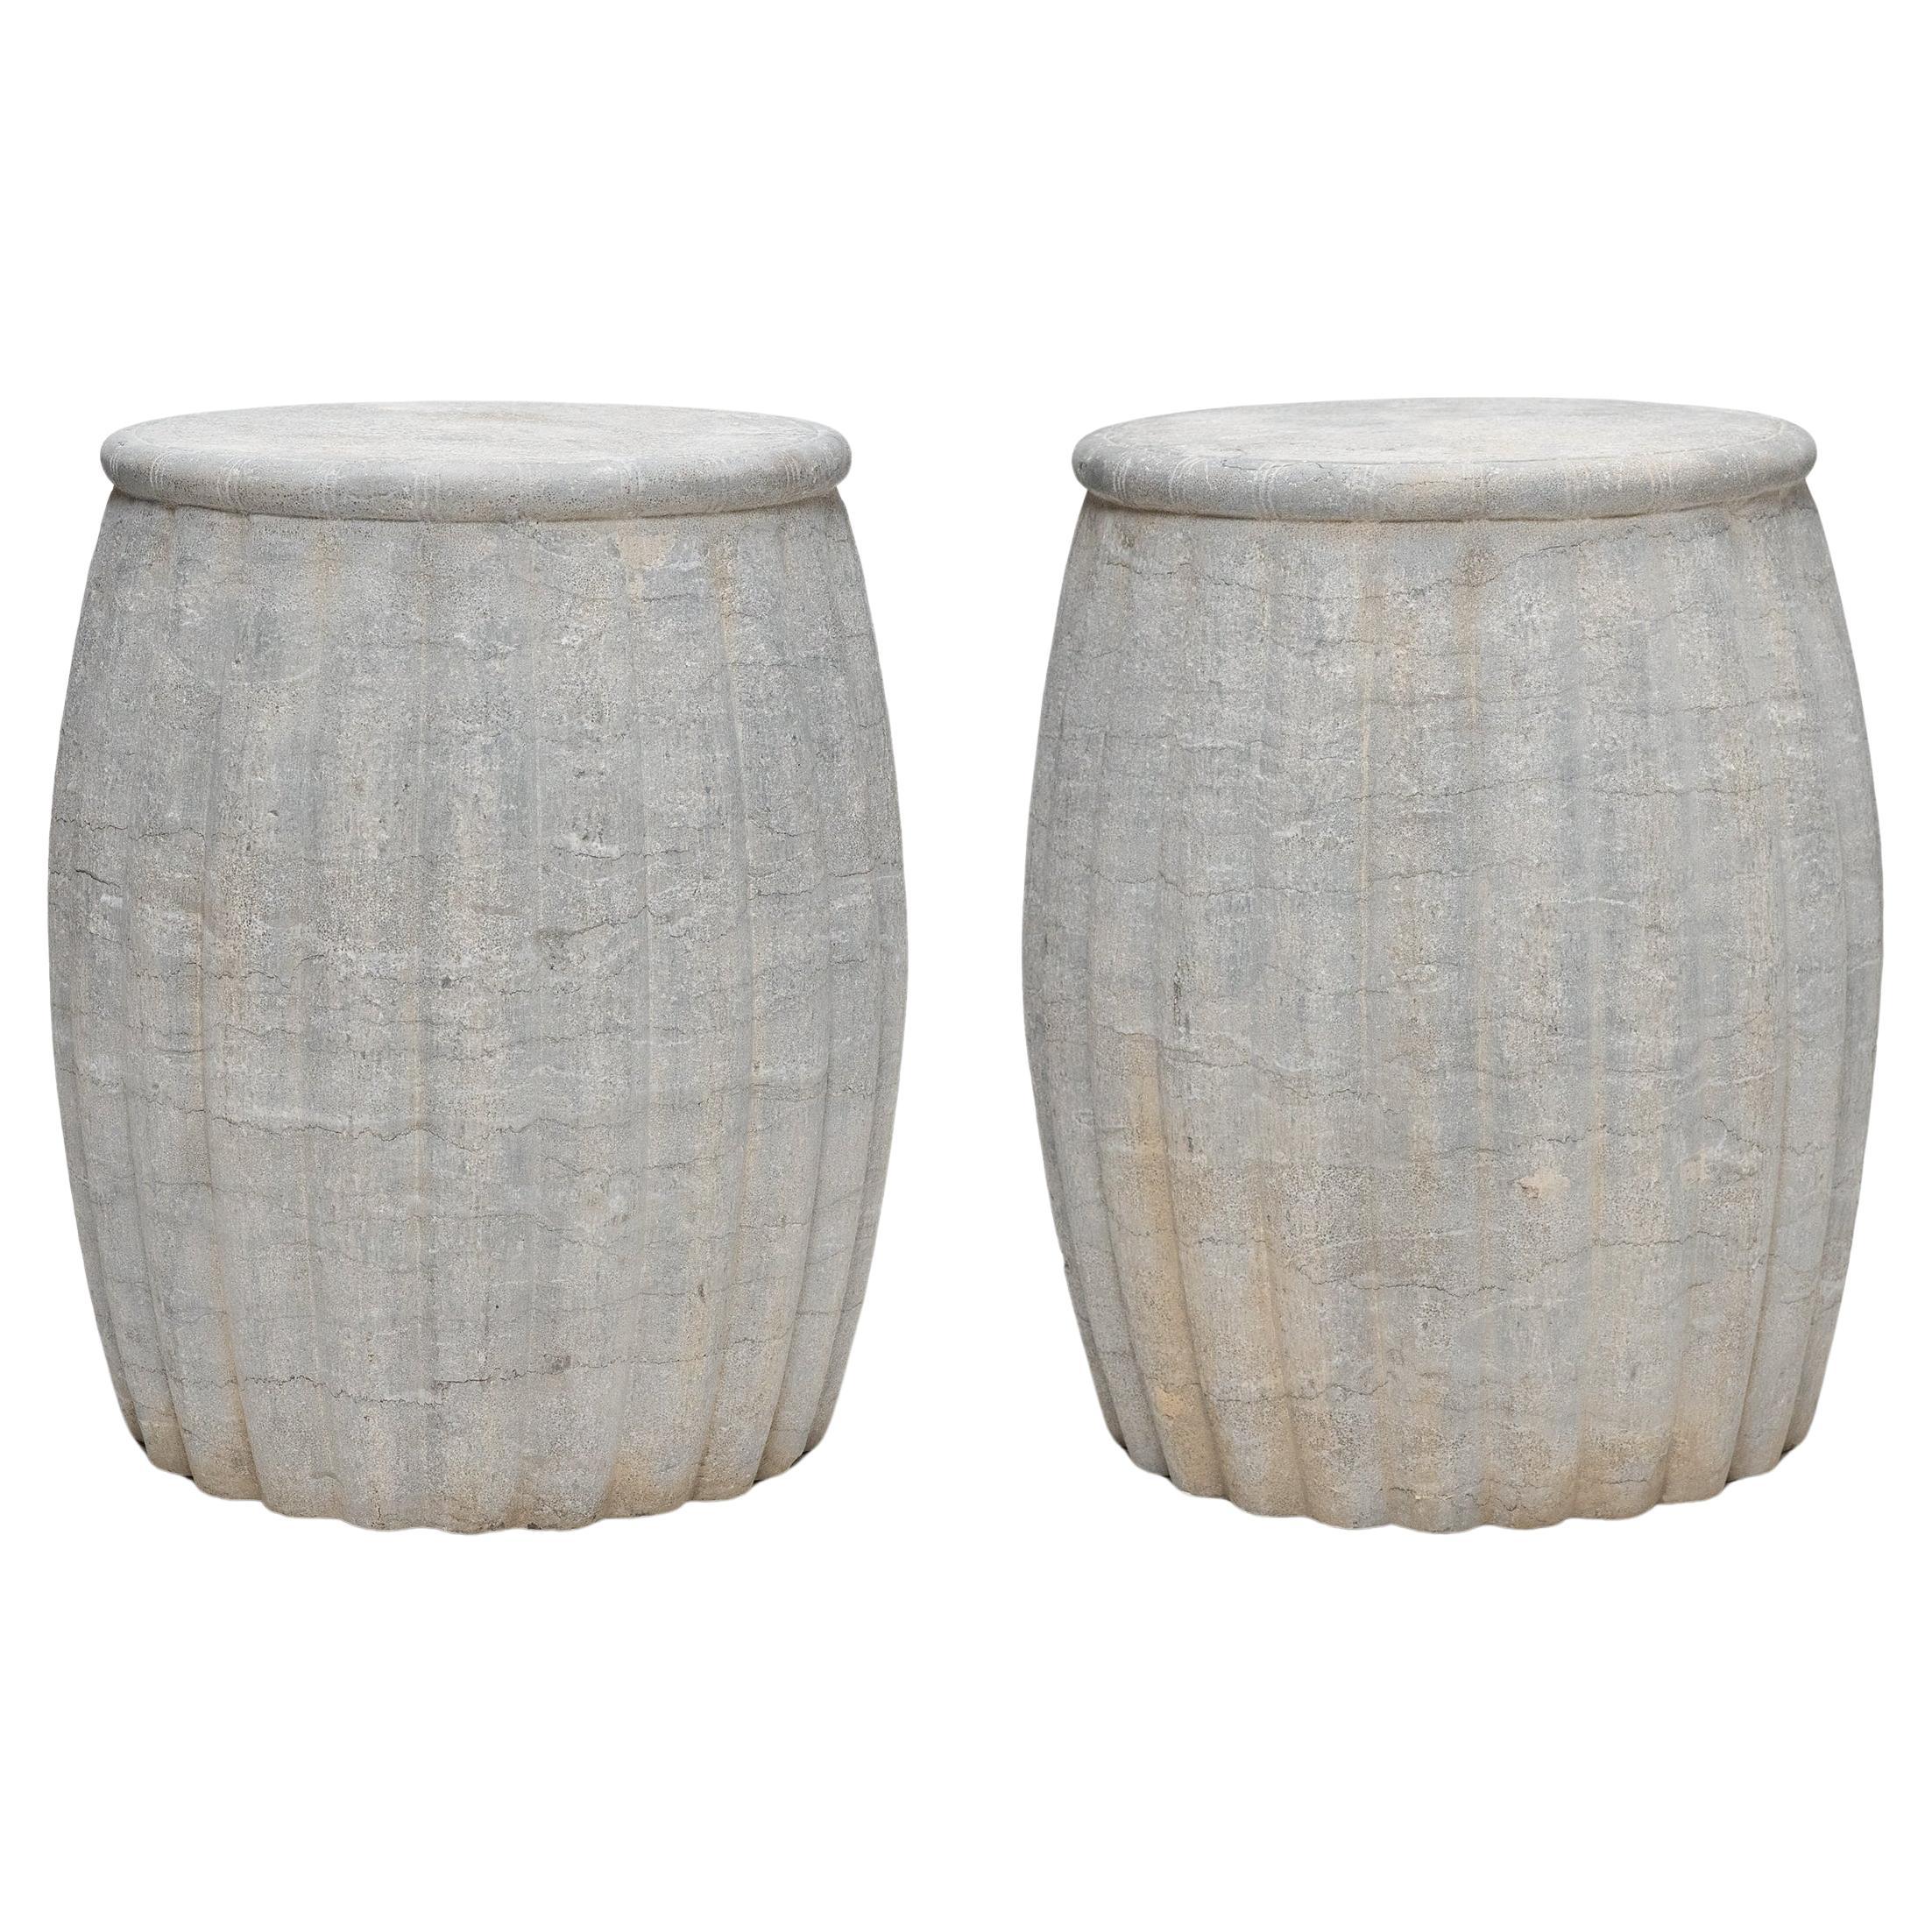 Pair of Chinese Melon Stone Drum Tables